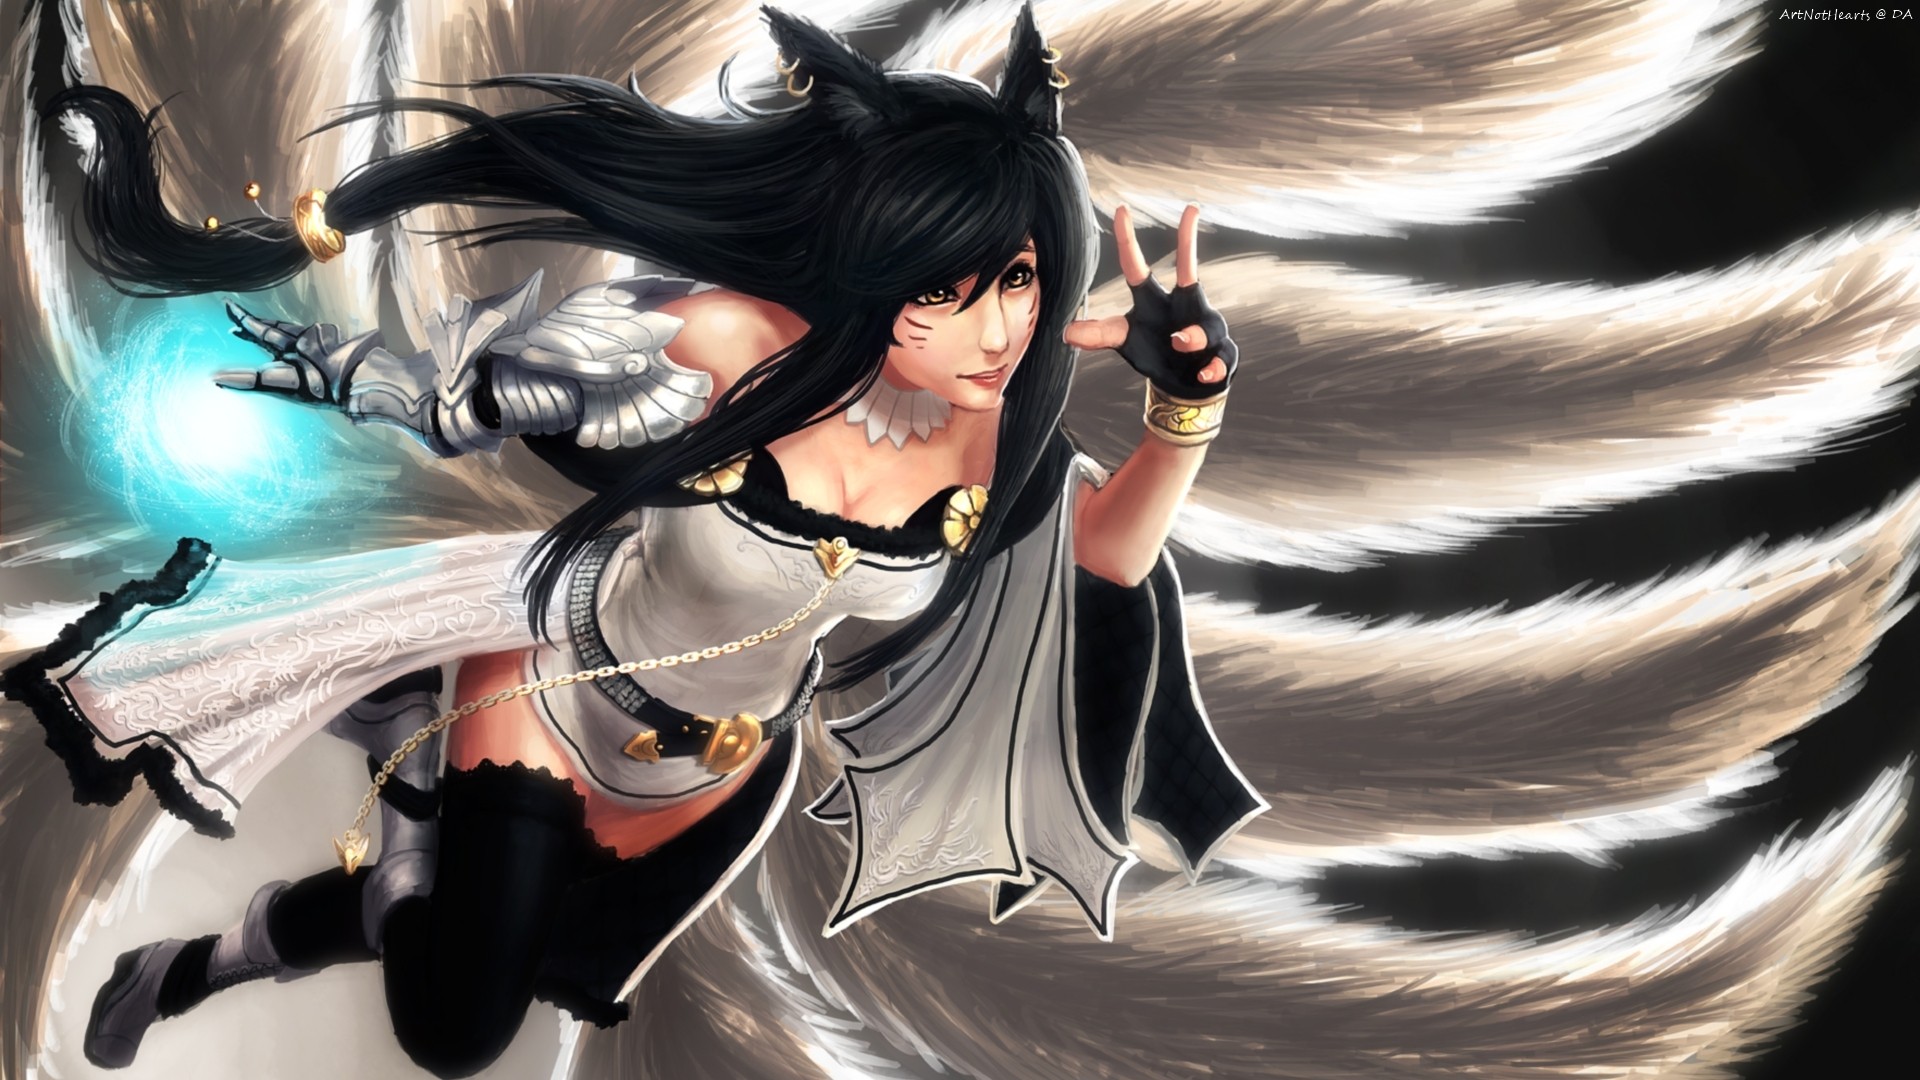 video game, tail, ahri (league of legends), thigh highs, white dress, chain, armor, magic, yellow eyes, animal ears, glow, league of legends, dress, long hair, belt, black hair images